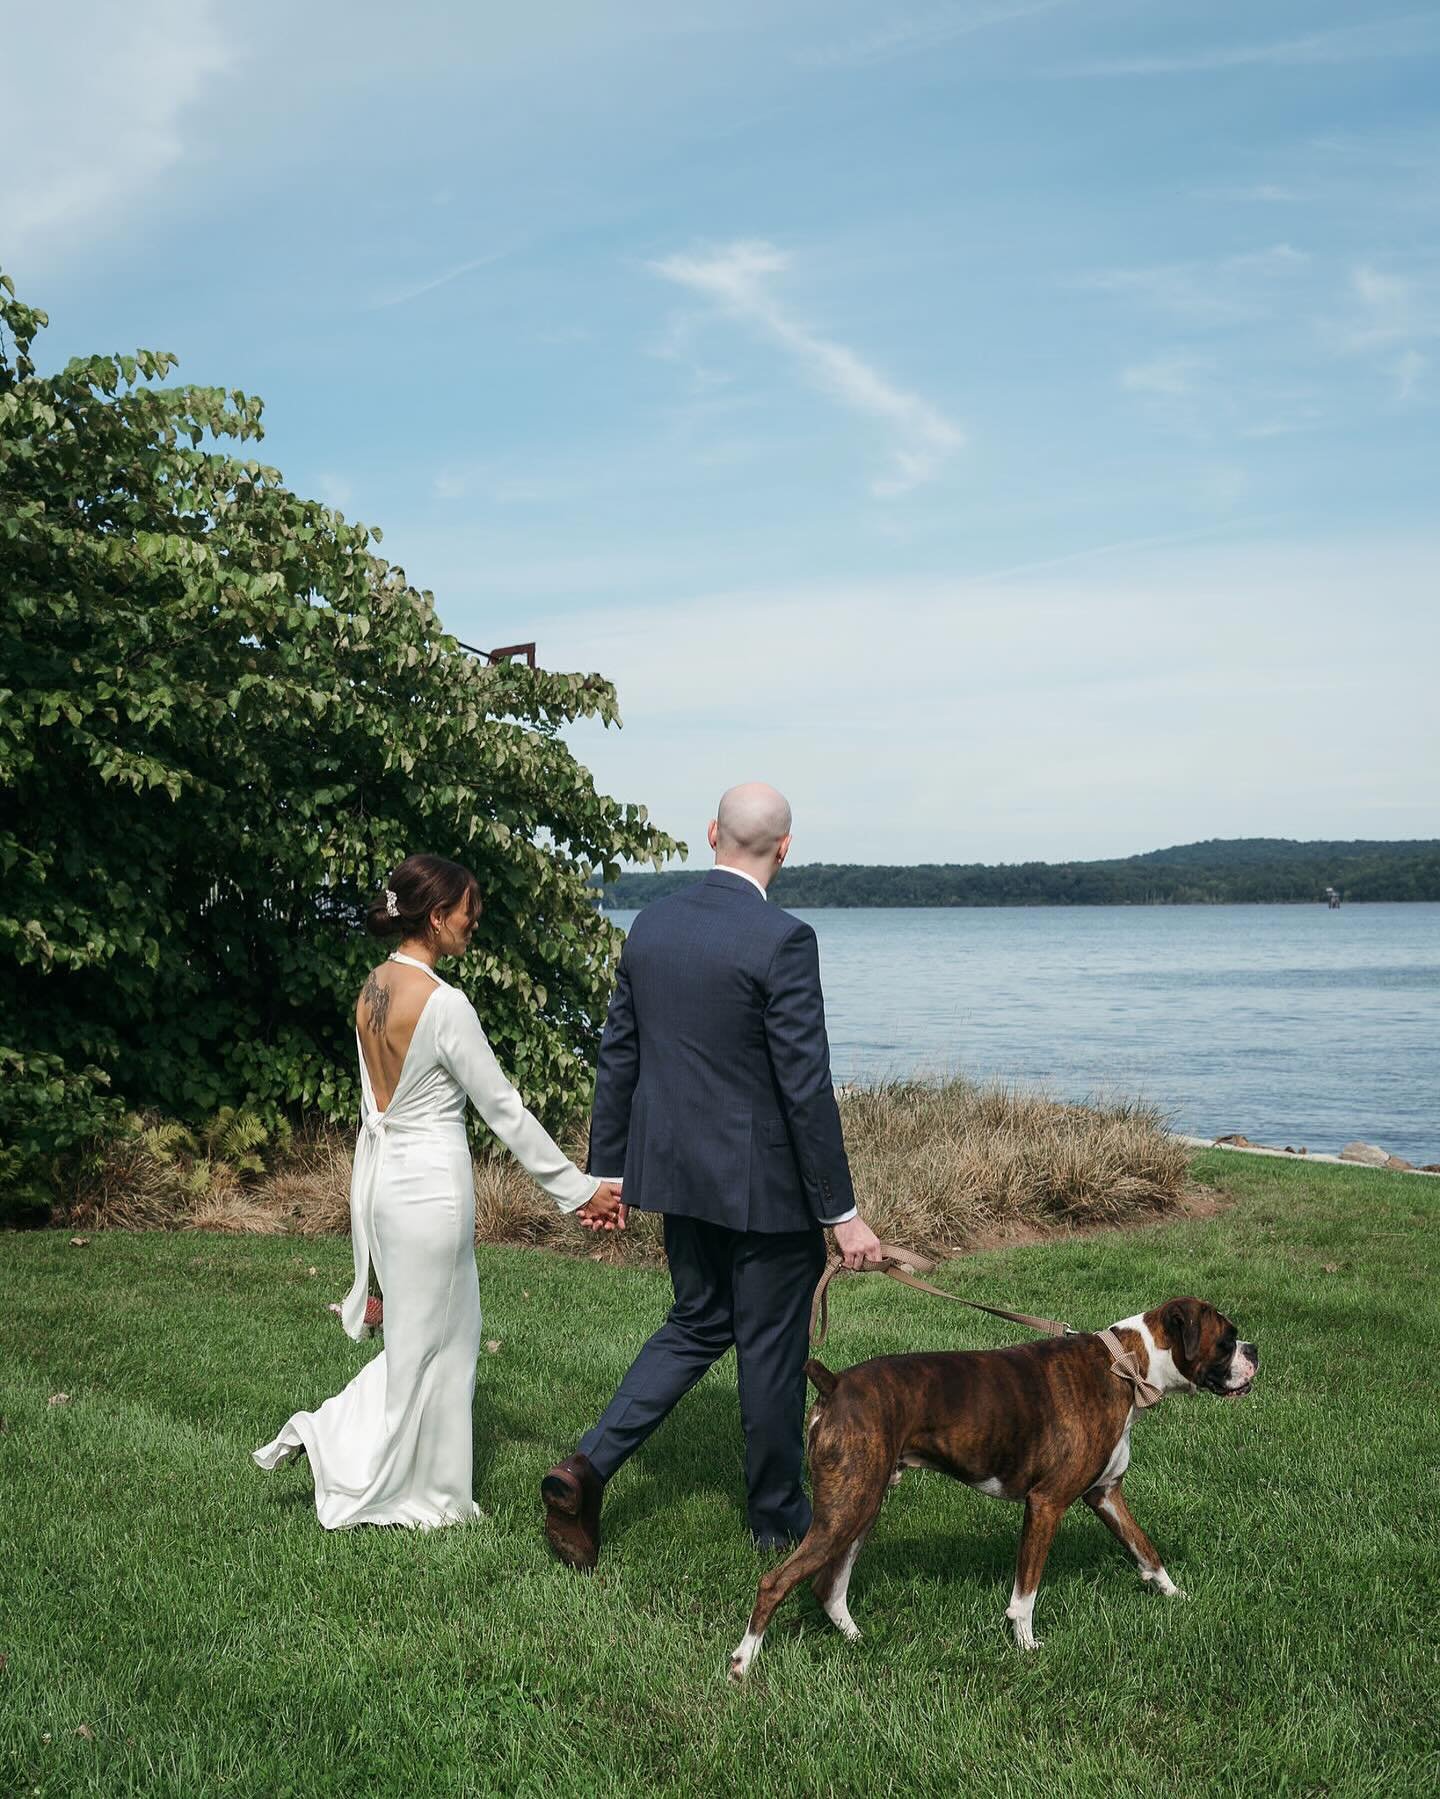 Nuptials at Hutton Brickyards are the ultimate family affair &mdash; fur babies included.

#HuttonBrickyards

Images by @harperpix 
Event organized by @alivelyevent